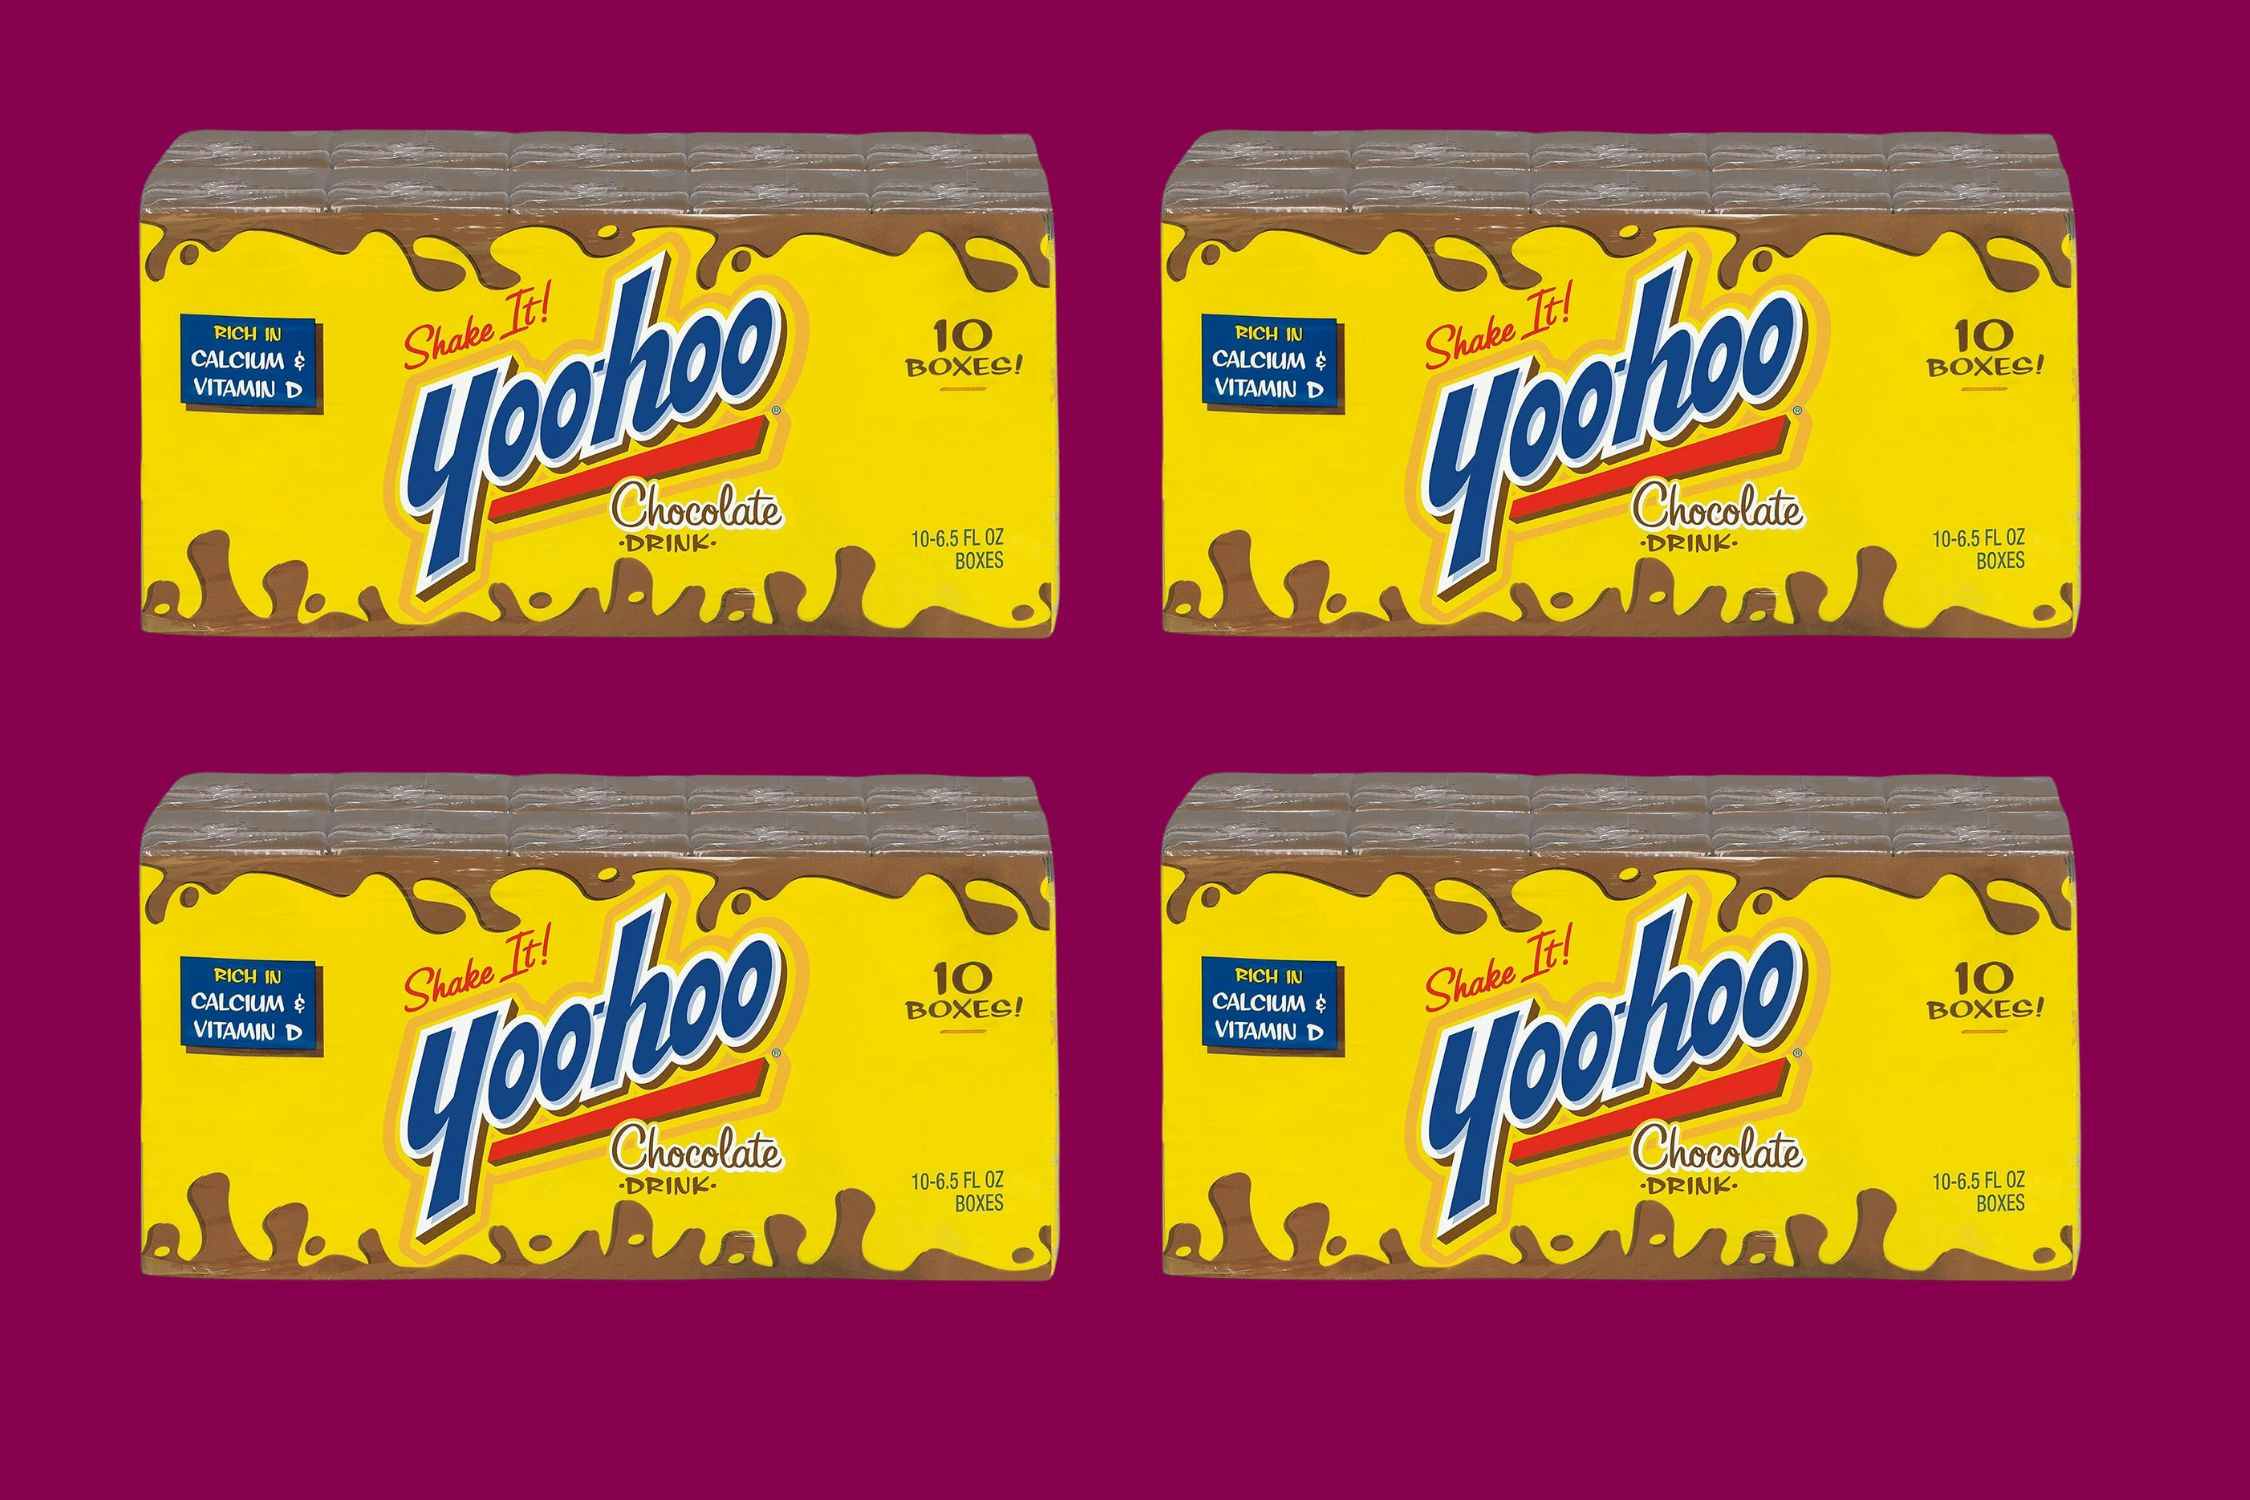 The Yoo-Hoo Chocolate Drink Deal Is Back — Get 40 Boxes for $8.52 on Amazon